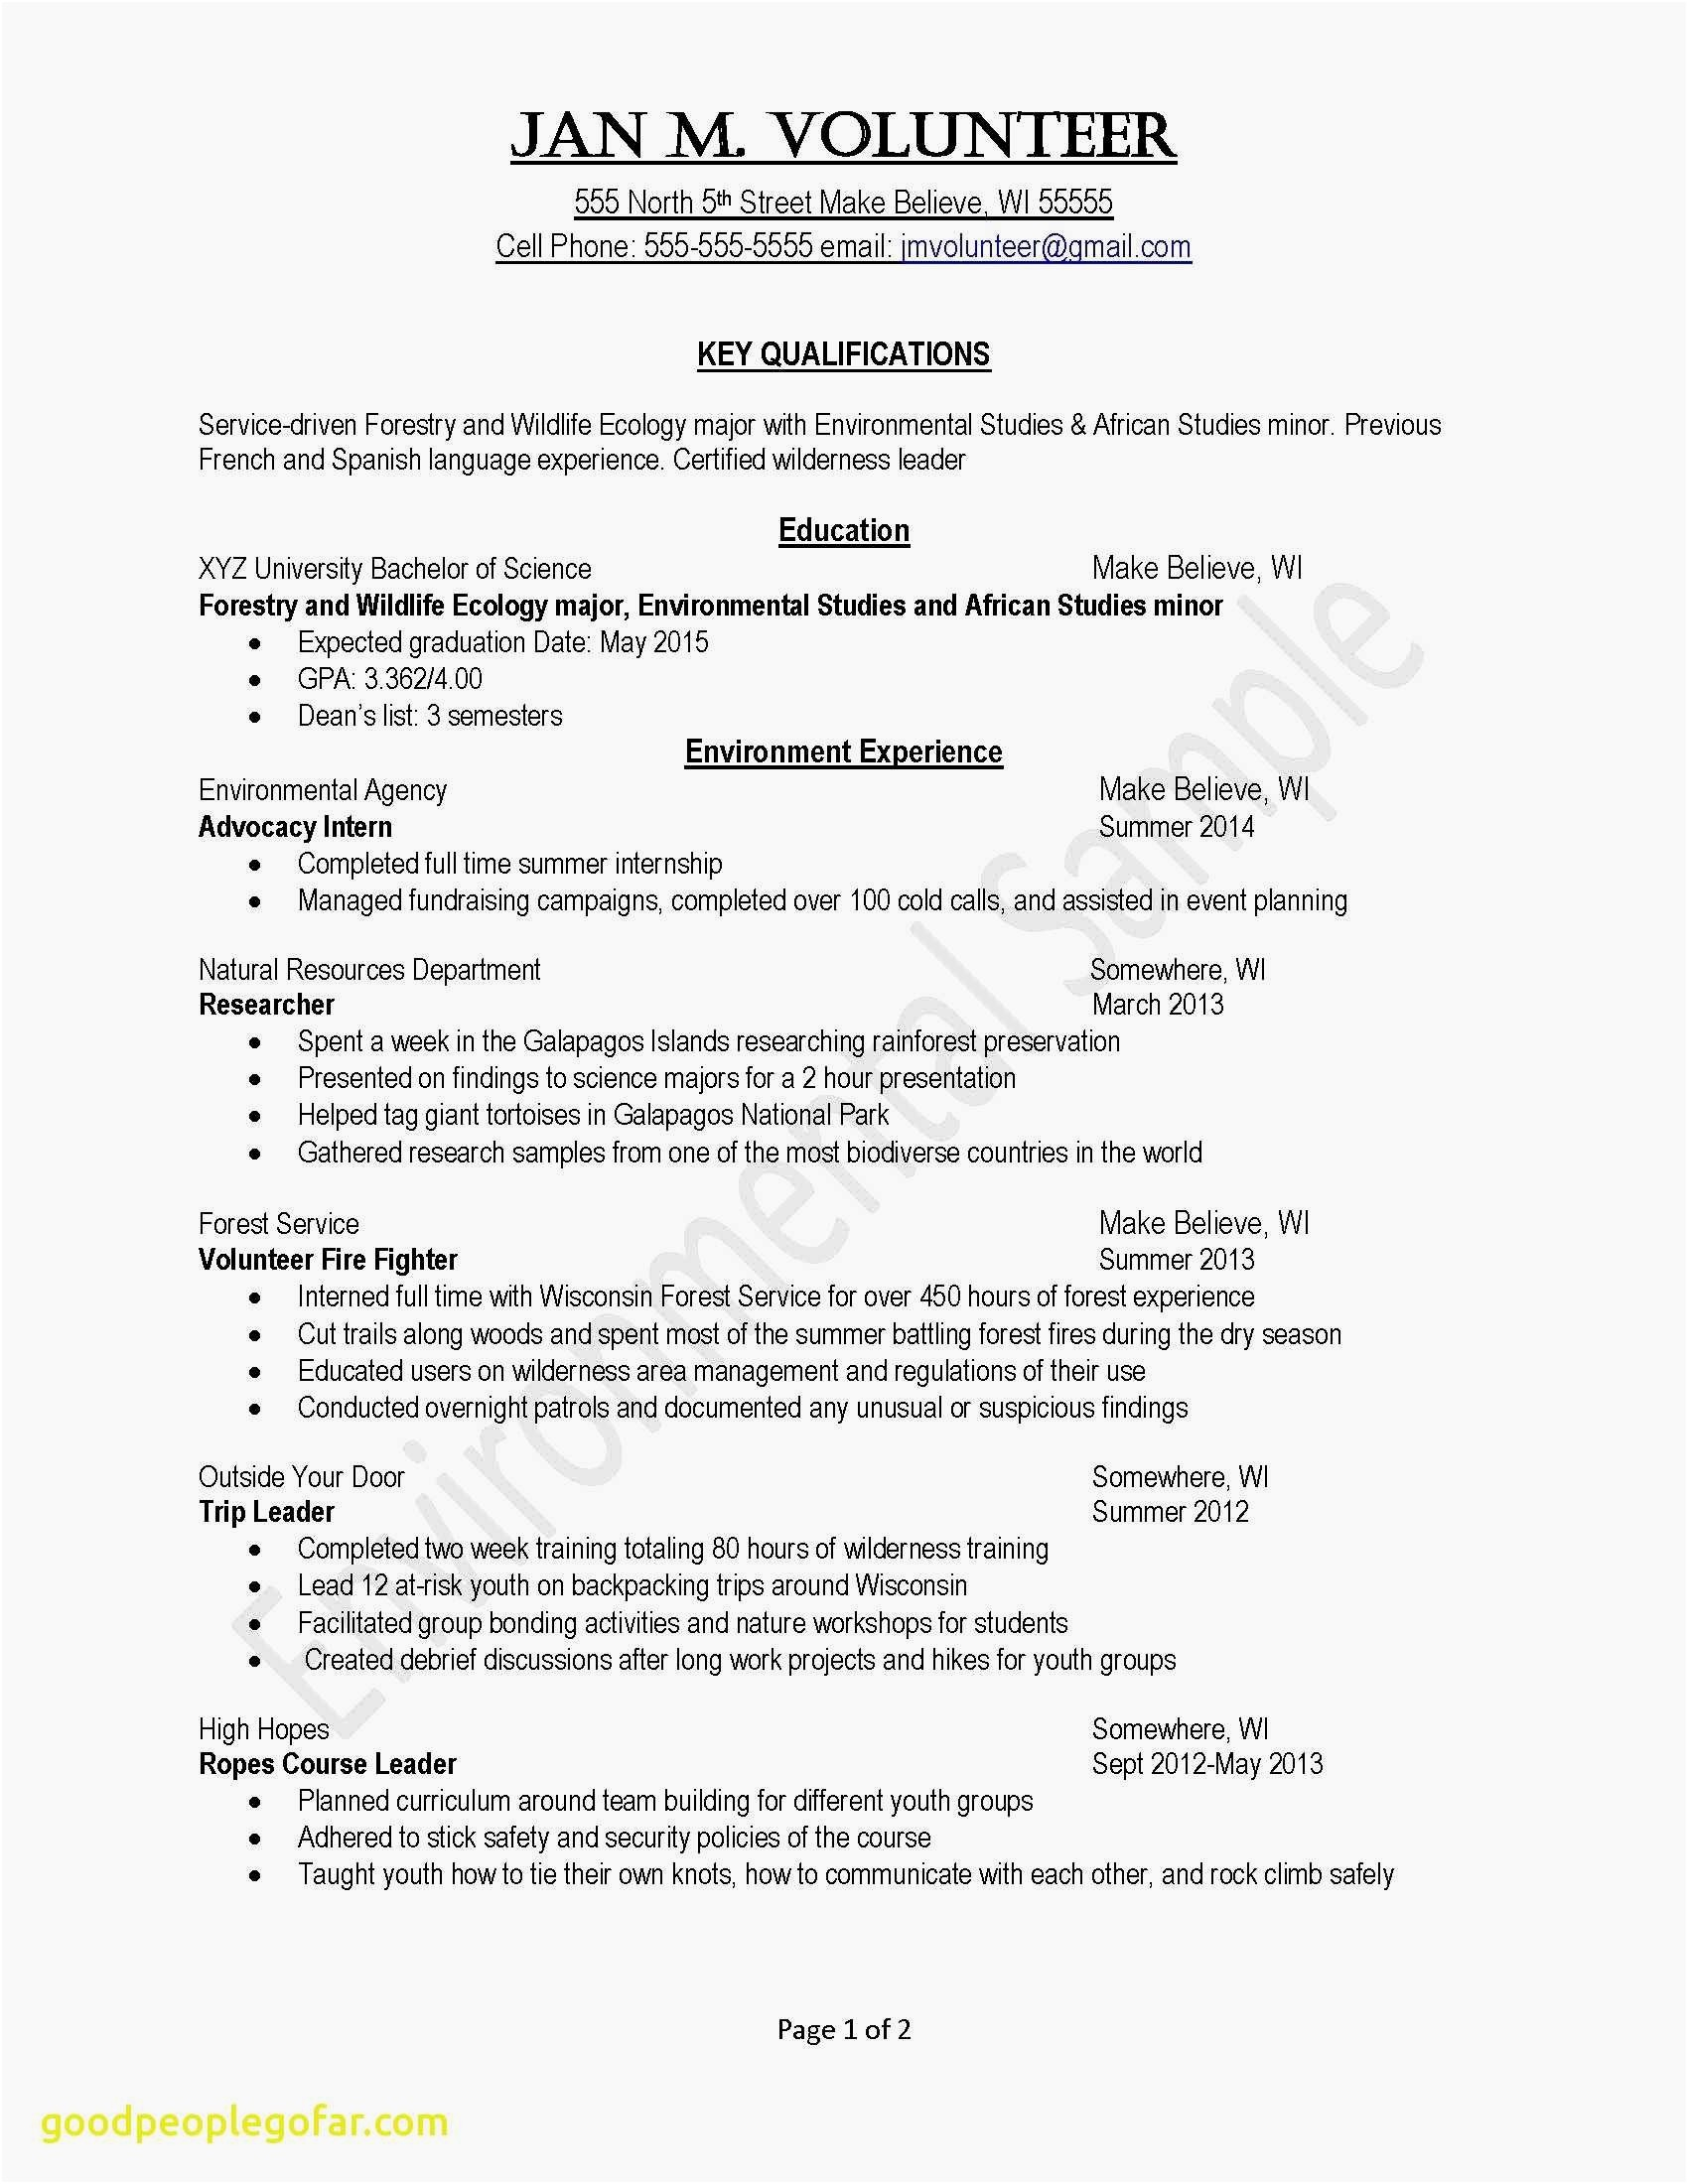 Email Letter Template - Resume Email Template Roddyschrock